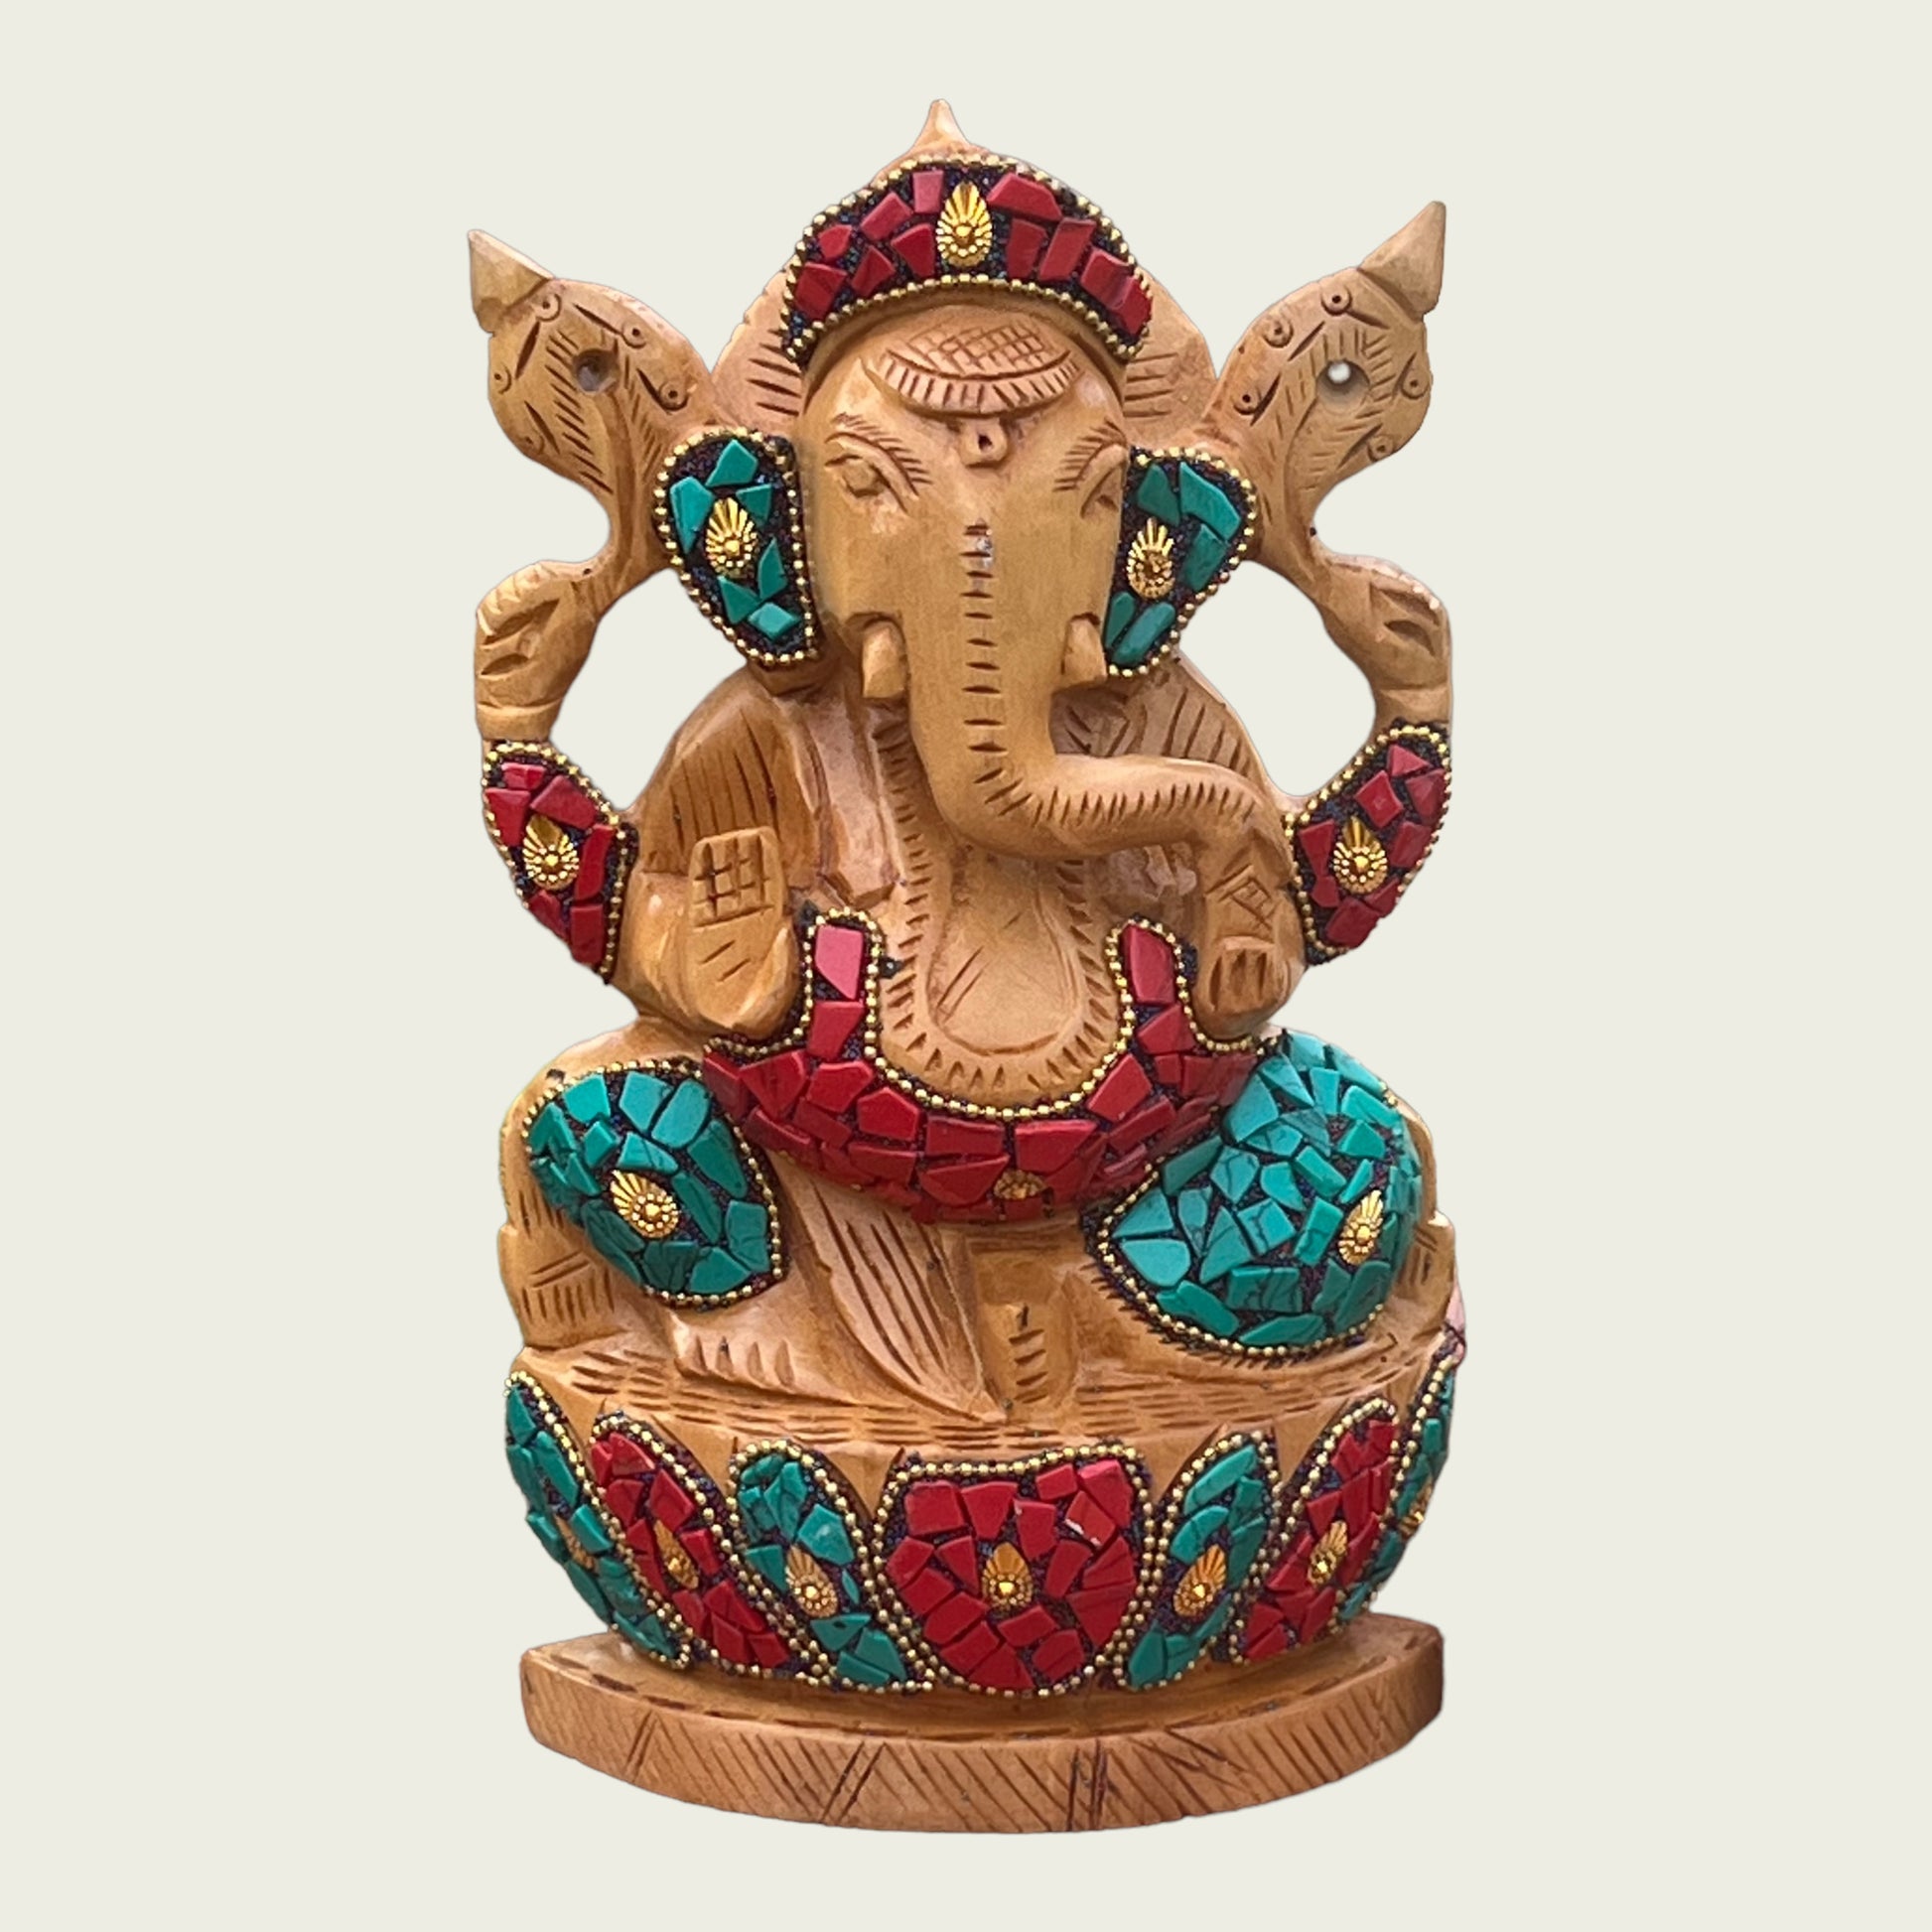 Image of Wooden Ganesha With Stone Work  The Source India is an Indian Handicraft, Home Decor, Furnishing and Textiles Store. Based out of Hauz Khas Village New Delhi, each piece is carefully procured to allow the enhancement of India's Culture.